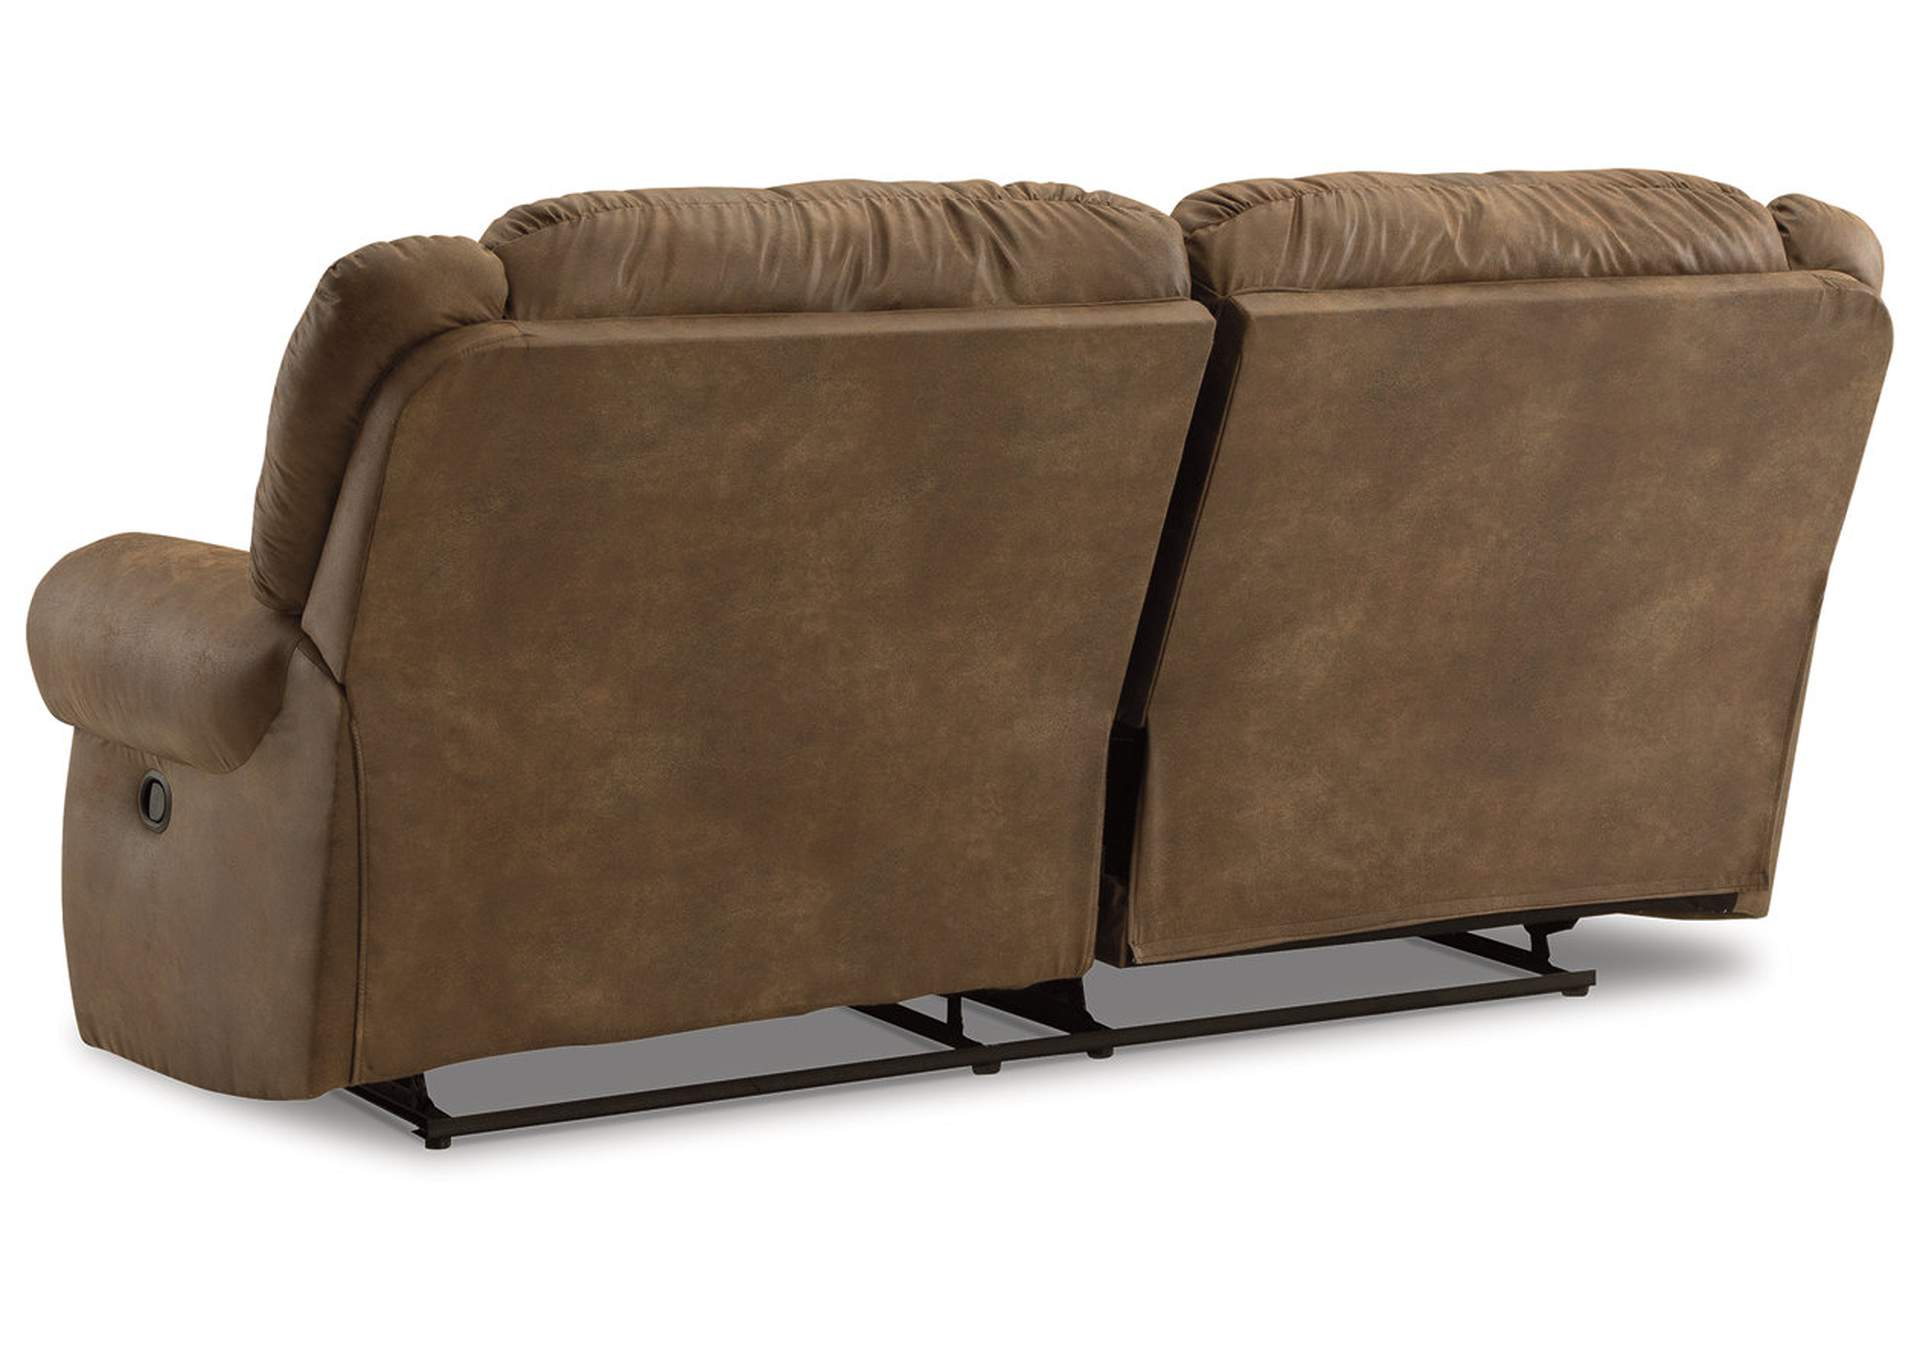 Boothbay Reclining Sofa,Signature Design By Ashley